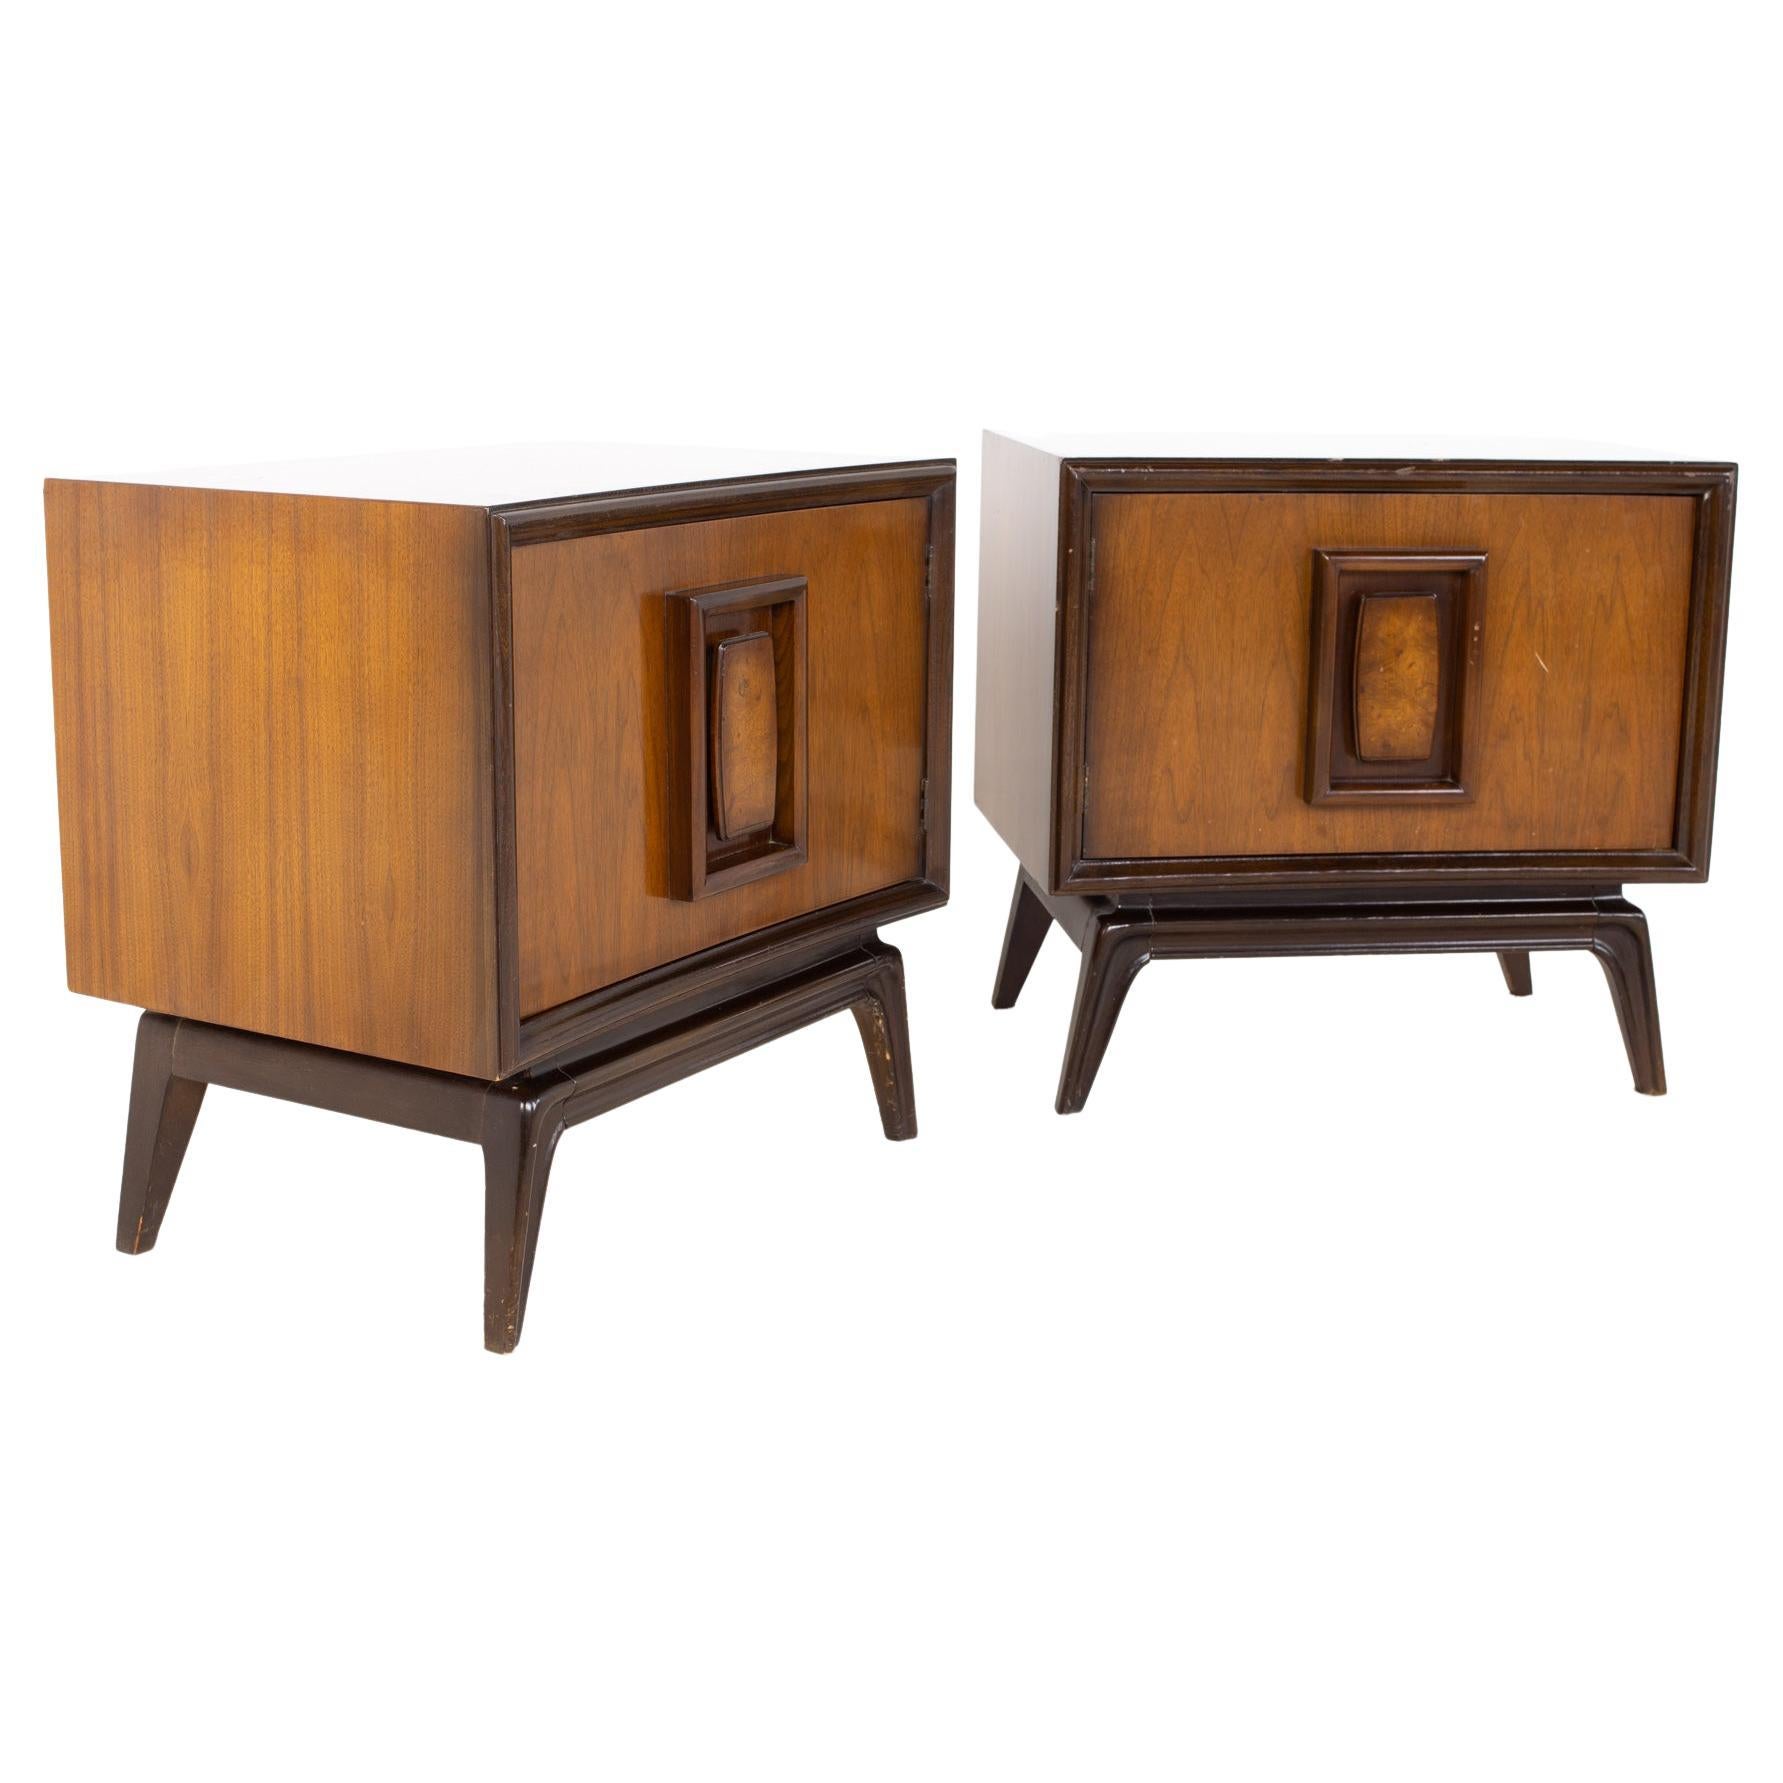 Hoke Wood Products Mid Century Walnut and Burlwood Nightstands, a Pair